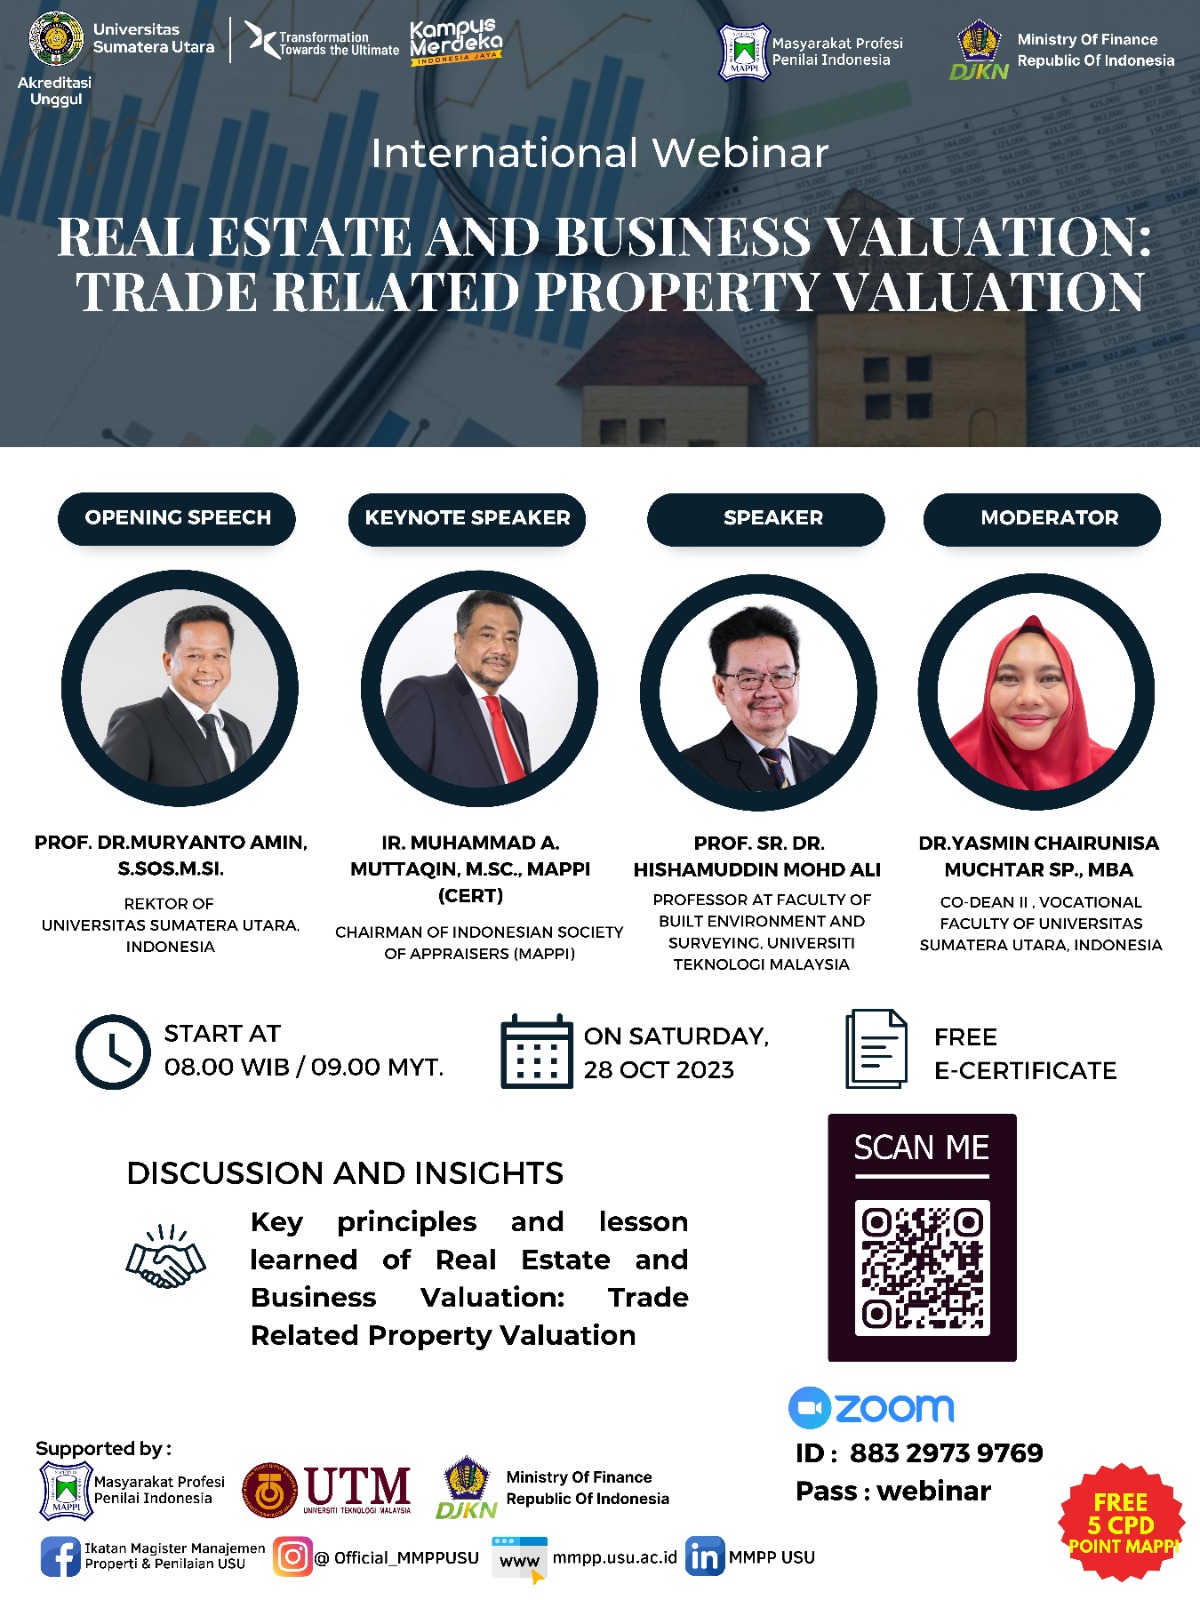 Real Estate and Business Valuation Trade Related Property Valuation